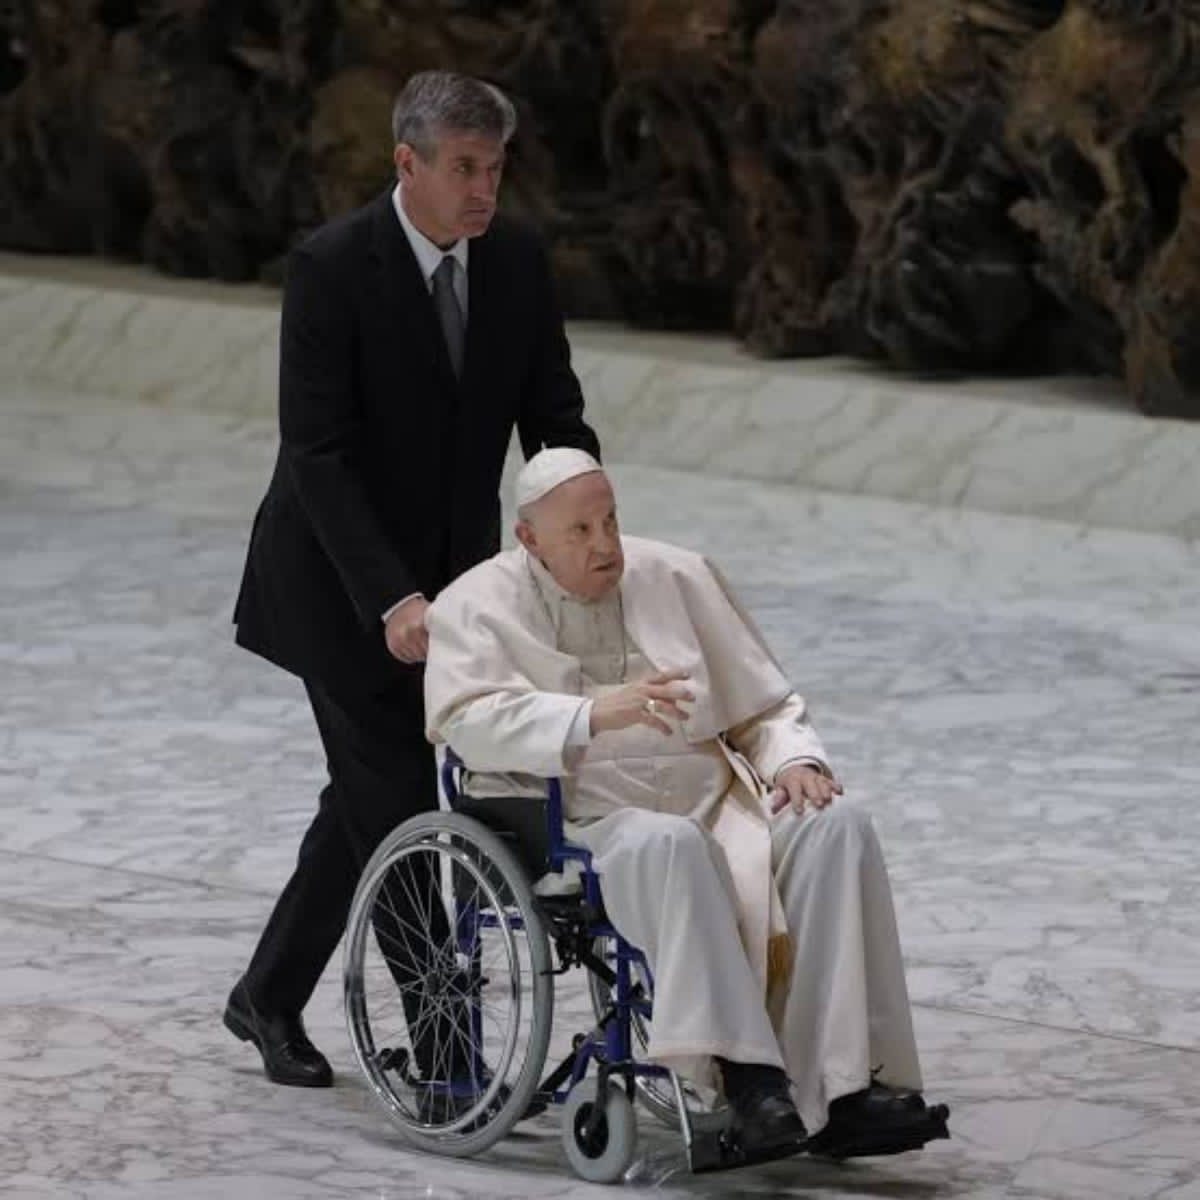 Pope Francis Publicly Appears On A WheelChair (Photos).